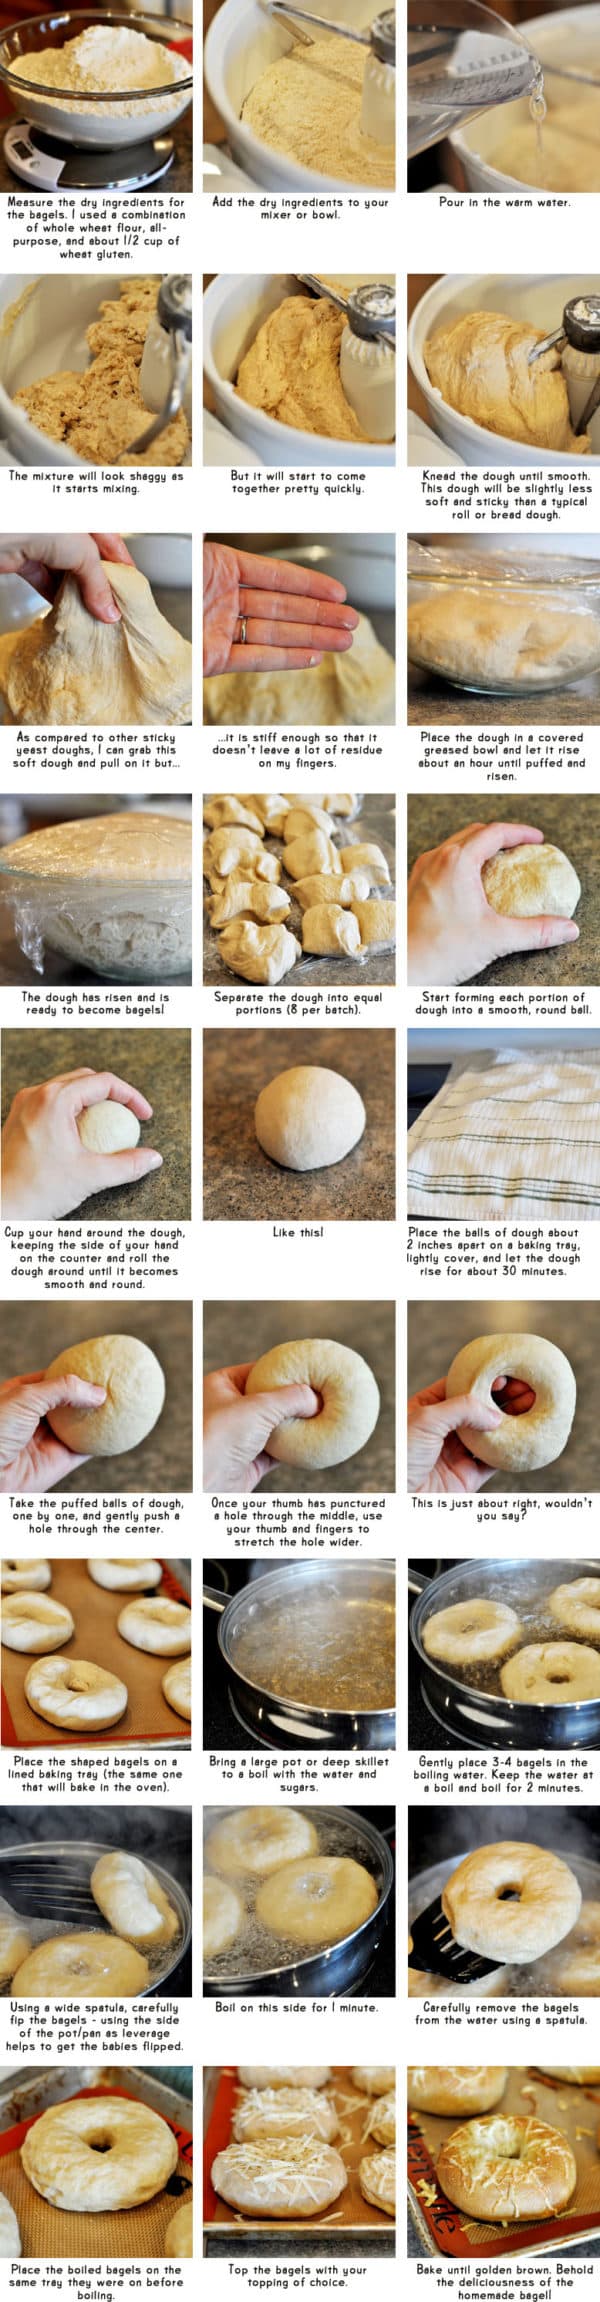 step-by-step collage of how to make bagels from scratch